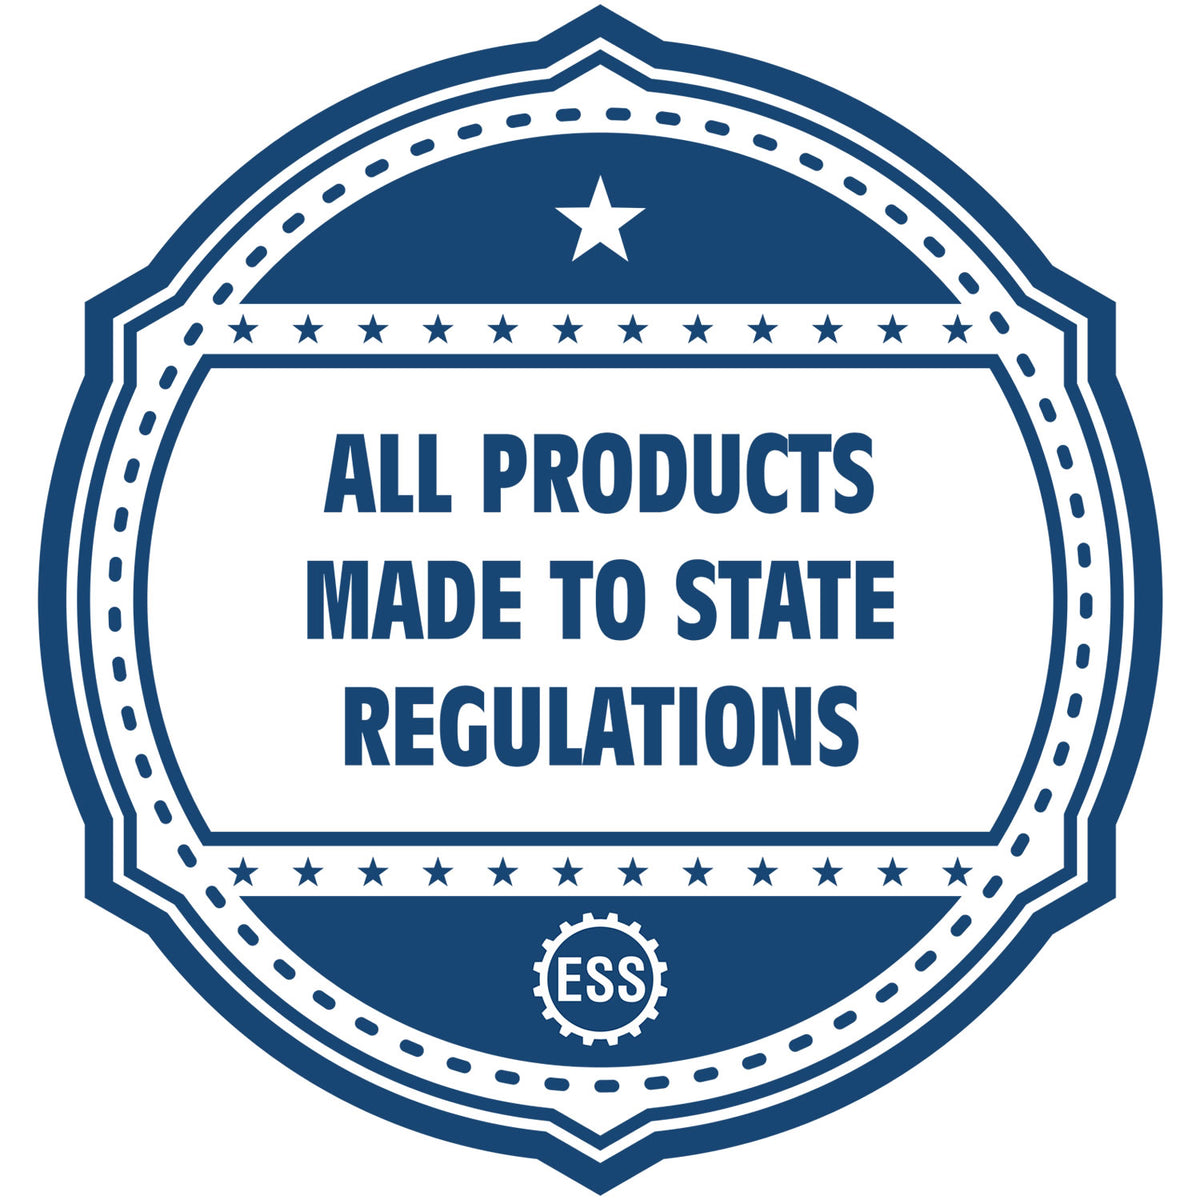 An icon or badge element for the Handheld Nevada Land Surveyor Seal showing that this product is made in compliance with state regulations.